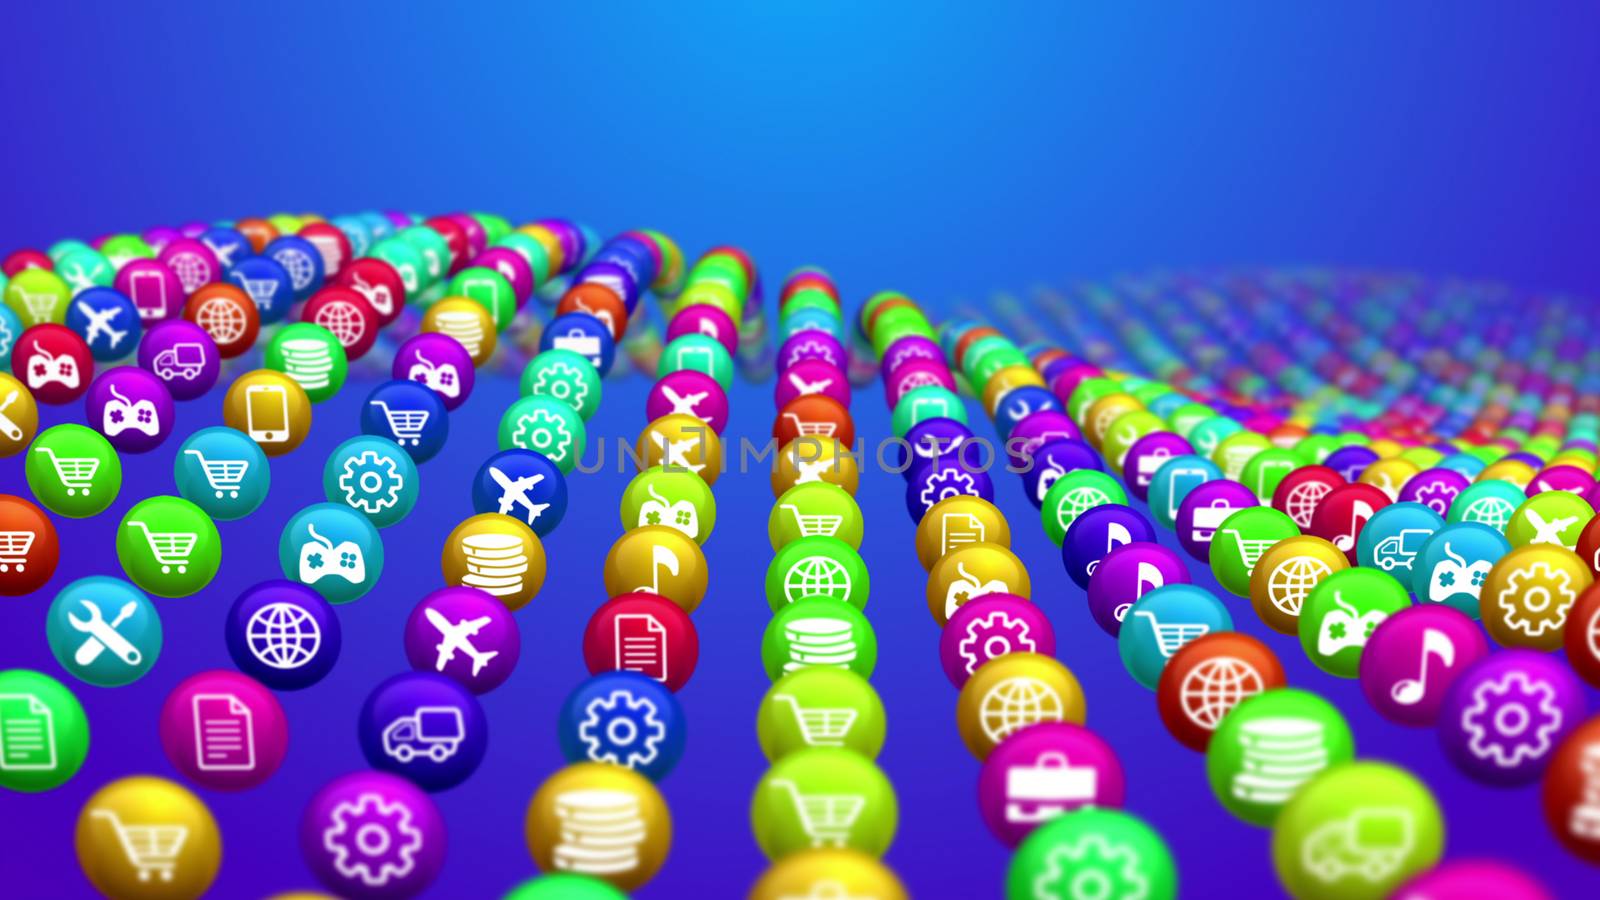 Splendid 3d rendering of social media services in round balls shaping concave surface. All balls are covered with funny buttons offering different business services in the blue background